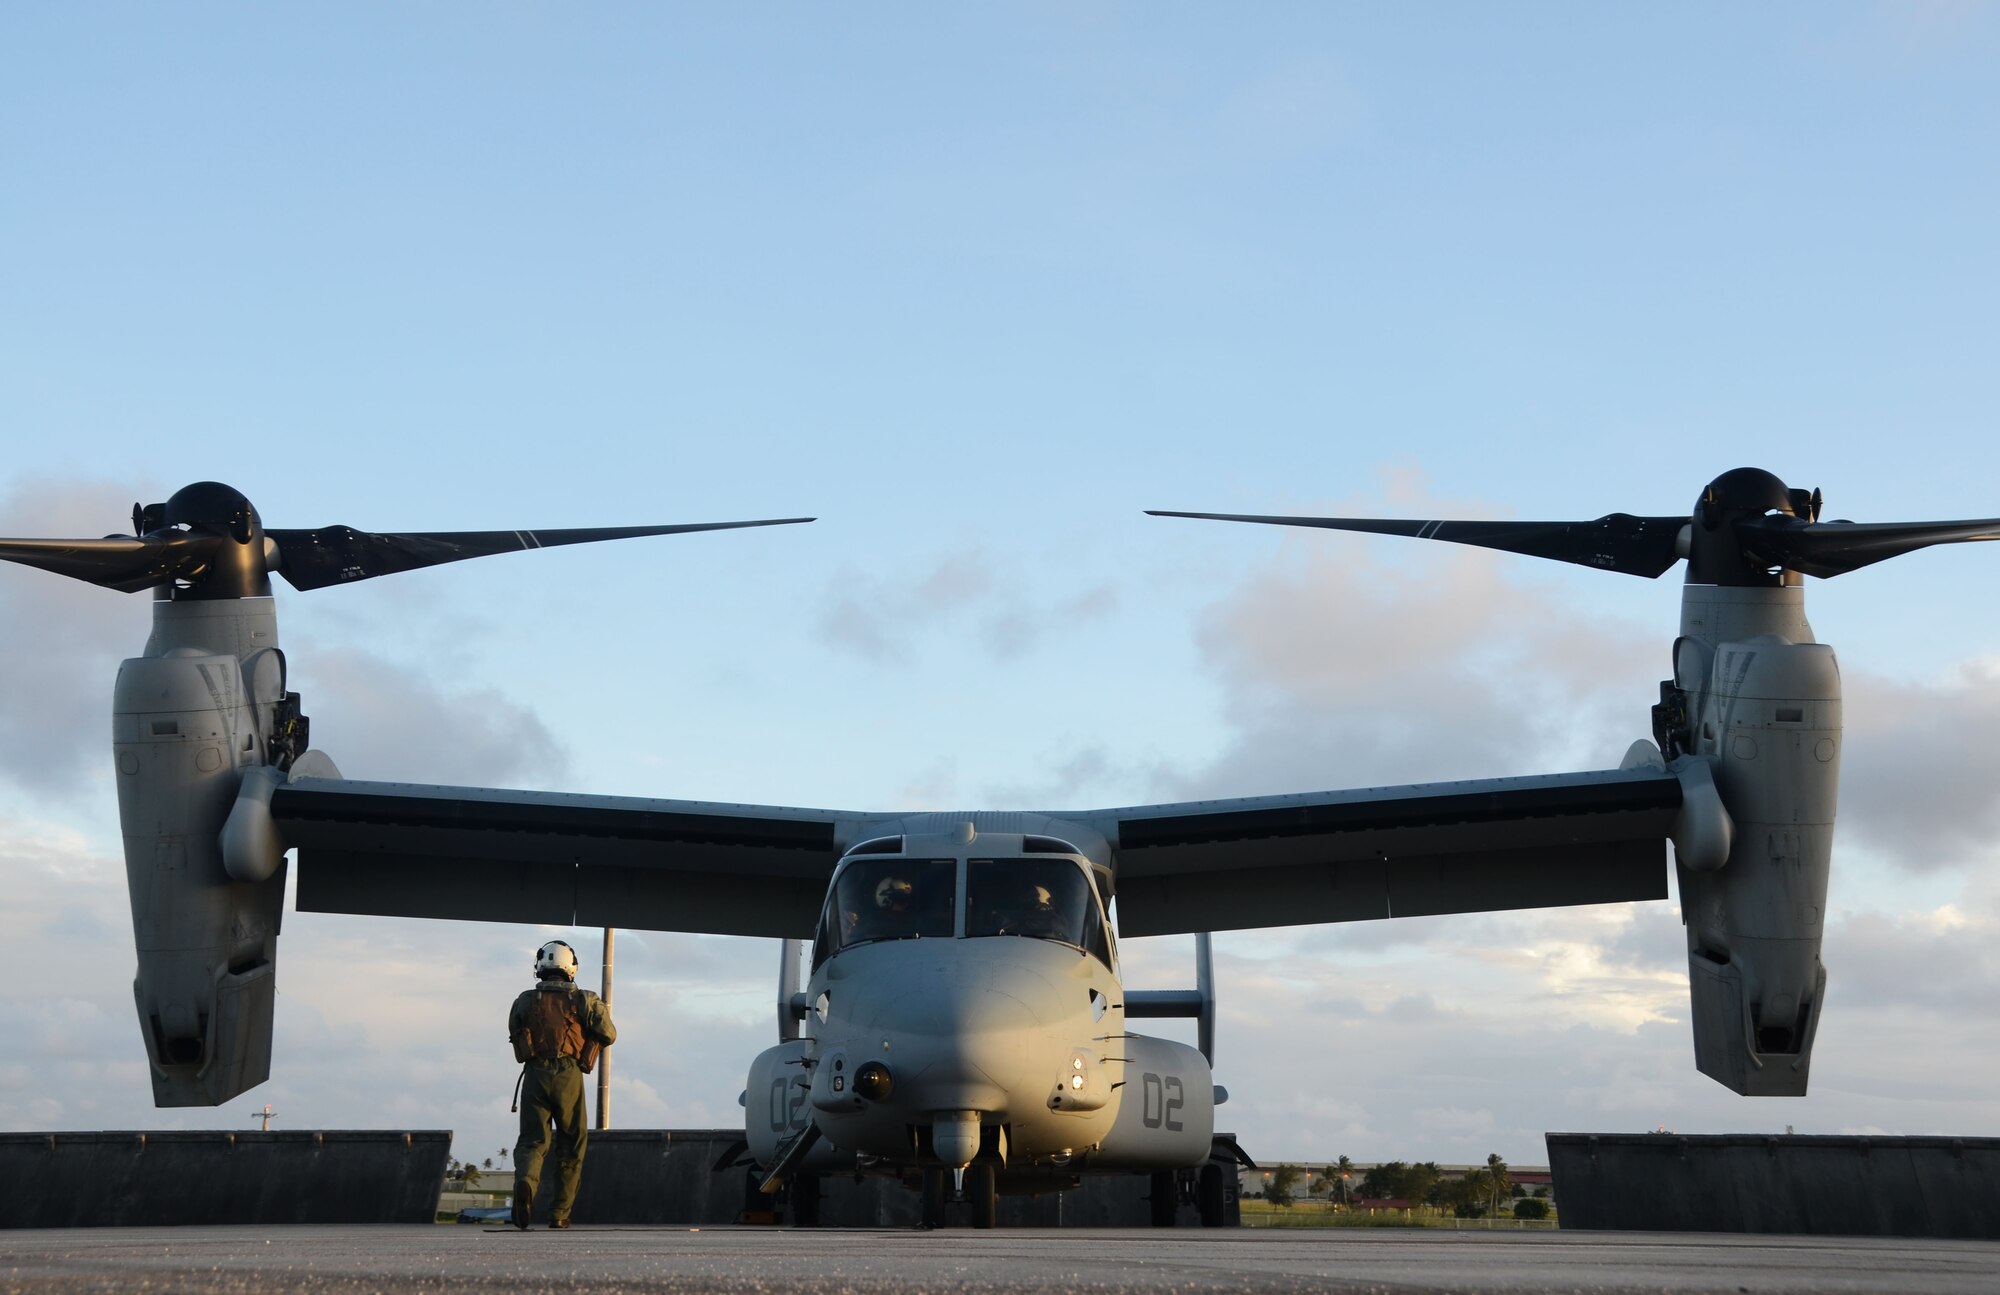 ANDERSEN AIR FORCE BASE, Guam—A U.S. Marine Corps MV-22B Osprey from Marine Corps Air Station Futenma, Okinawa, Japan, parks on Andersen Air Force Base, Guam, December 7, 2012. Three Ospreys traveled to Guam in support of Exercise Forager Fury 2012.  This is the first exercise the Ospreys have participated in since replacing the CH-46 helicopters in Okinawa. (U.S. Air Force photo by Senior Airman Benjamin Wiseman/Released)